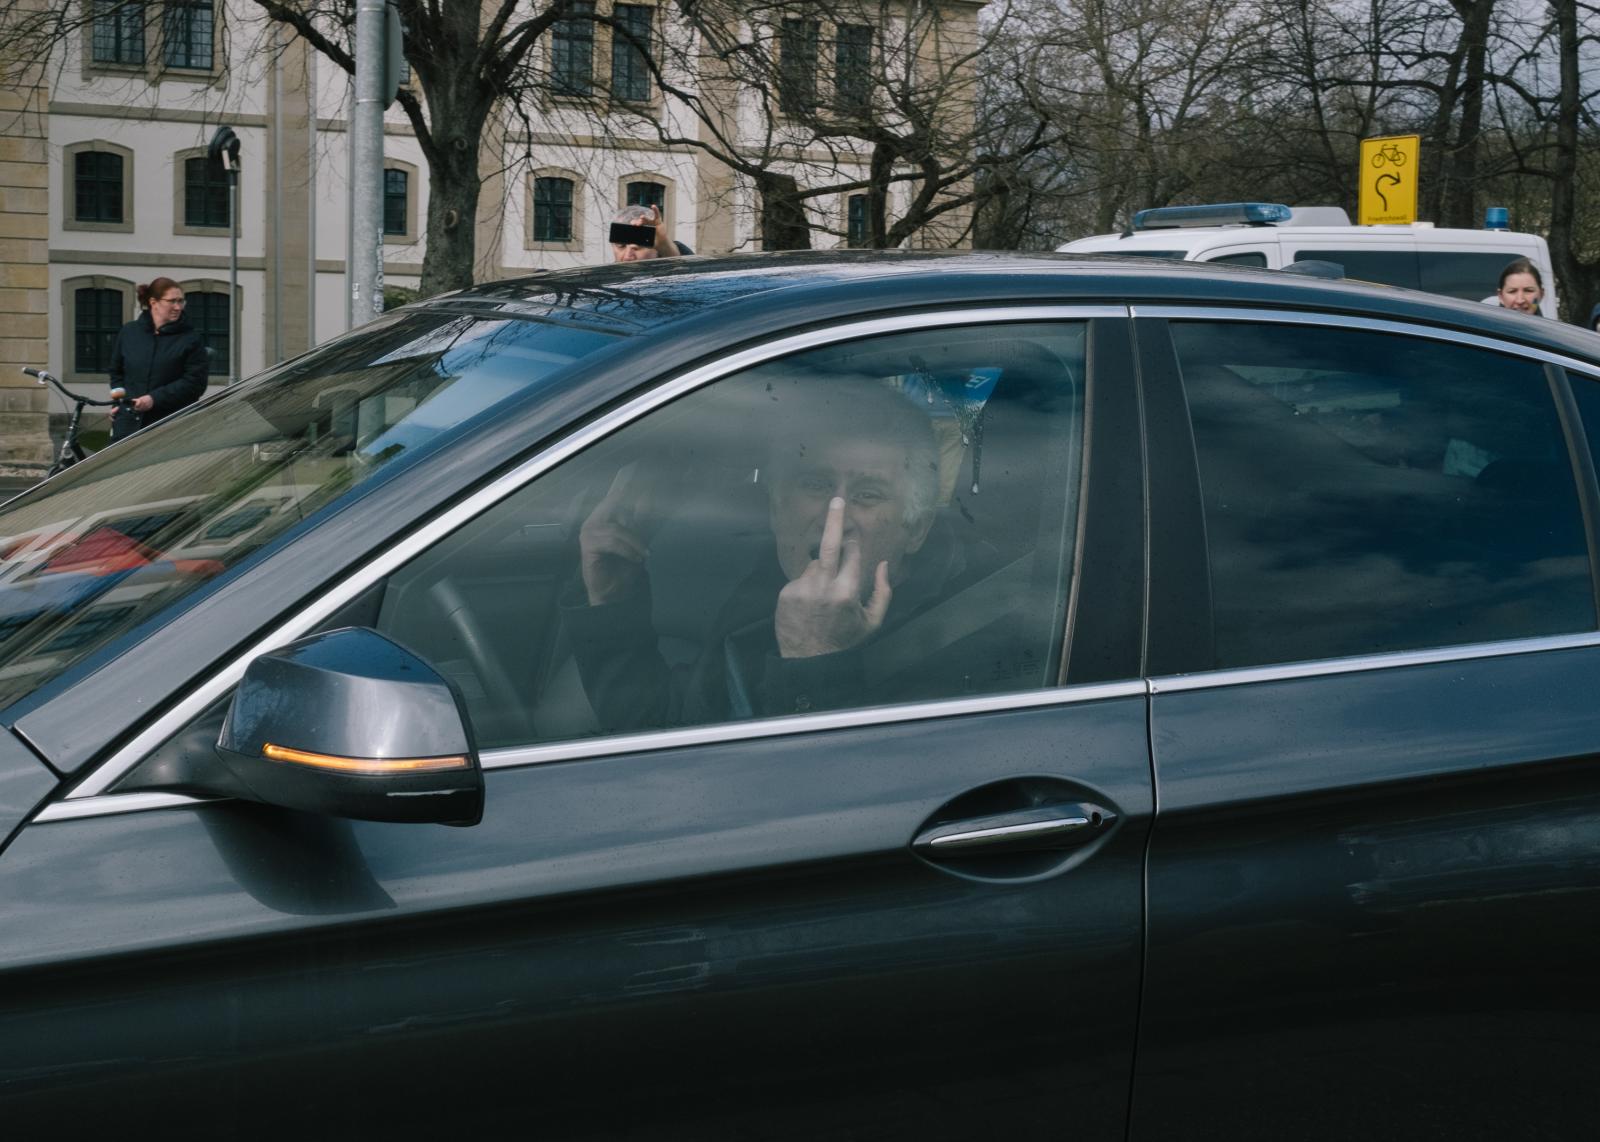 Russian Motorcade in Hanover Blocked - A participant of the motorcade waves middle-fingers at...